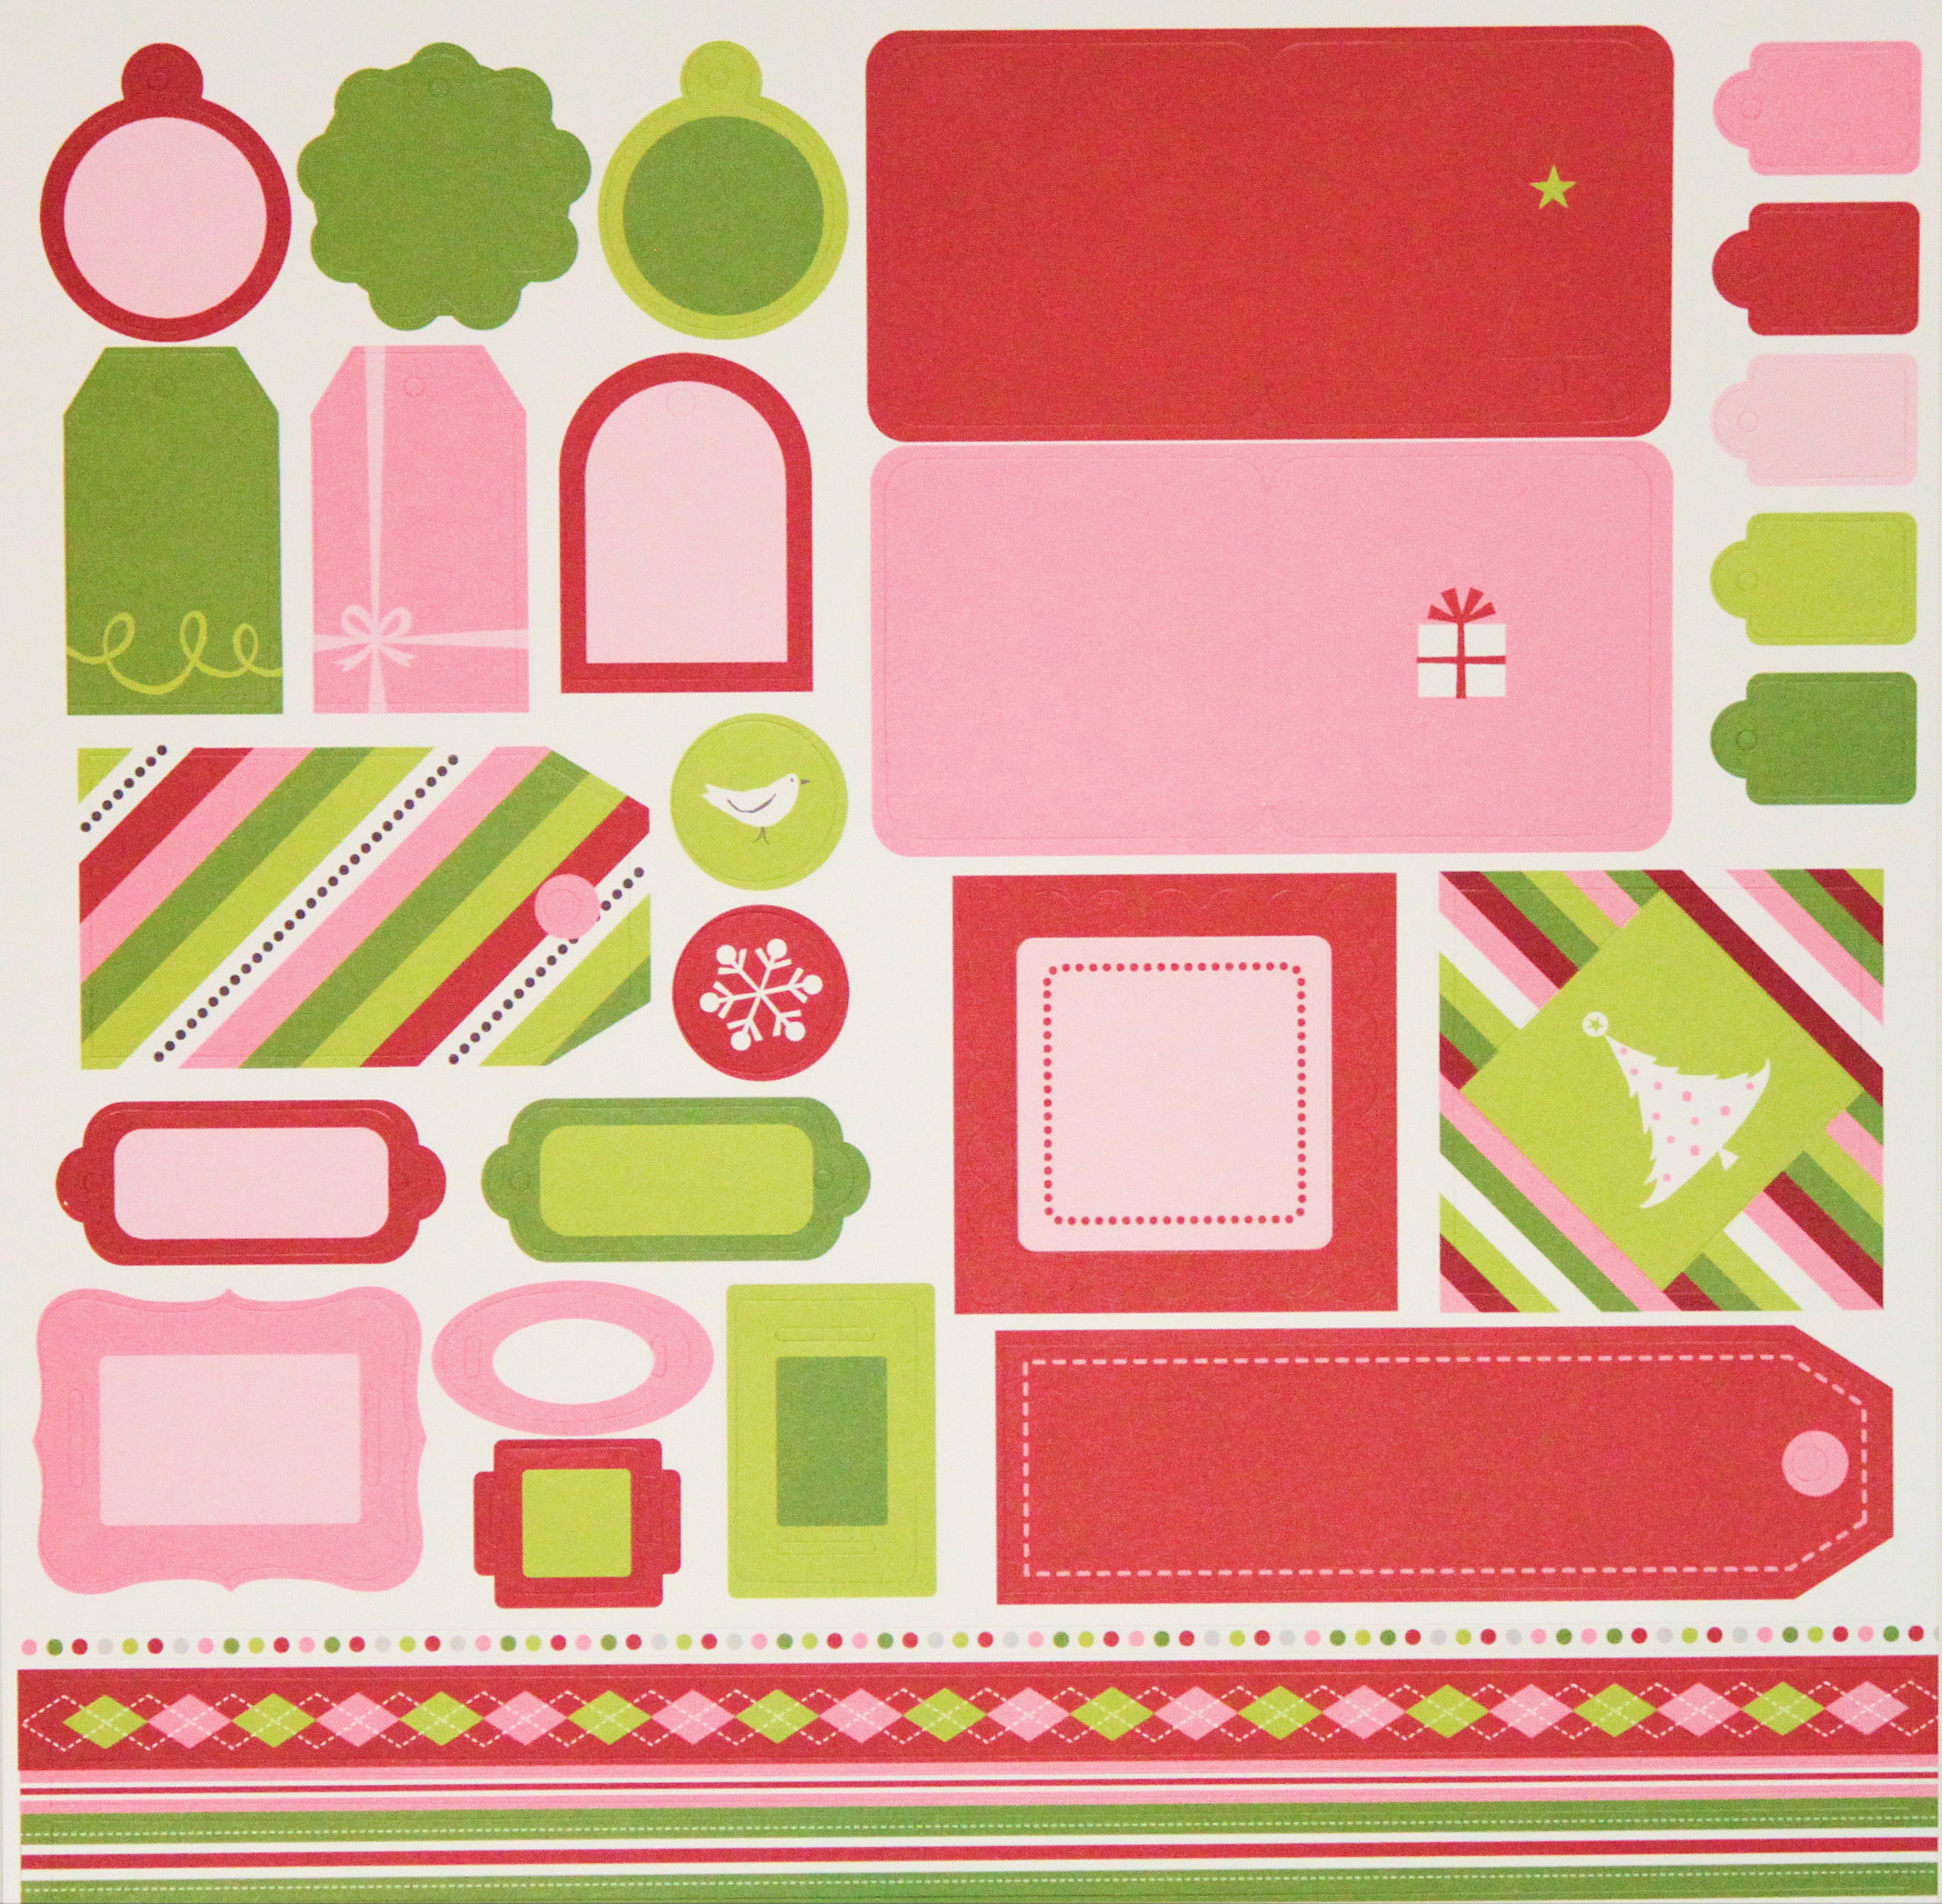 Momenta Christmas Colored Tags Punch Out Sheet #2